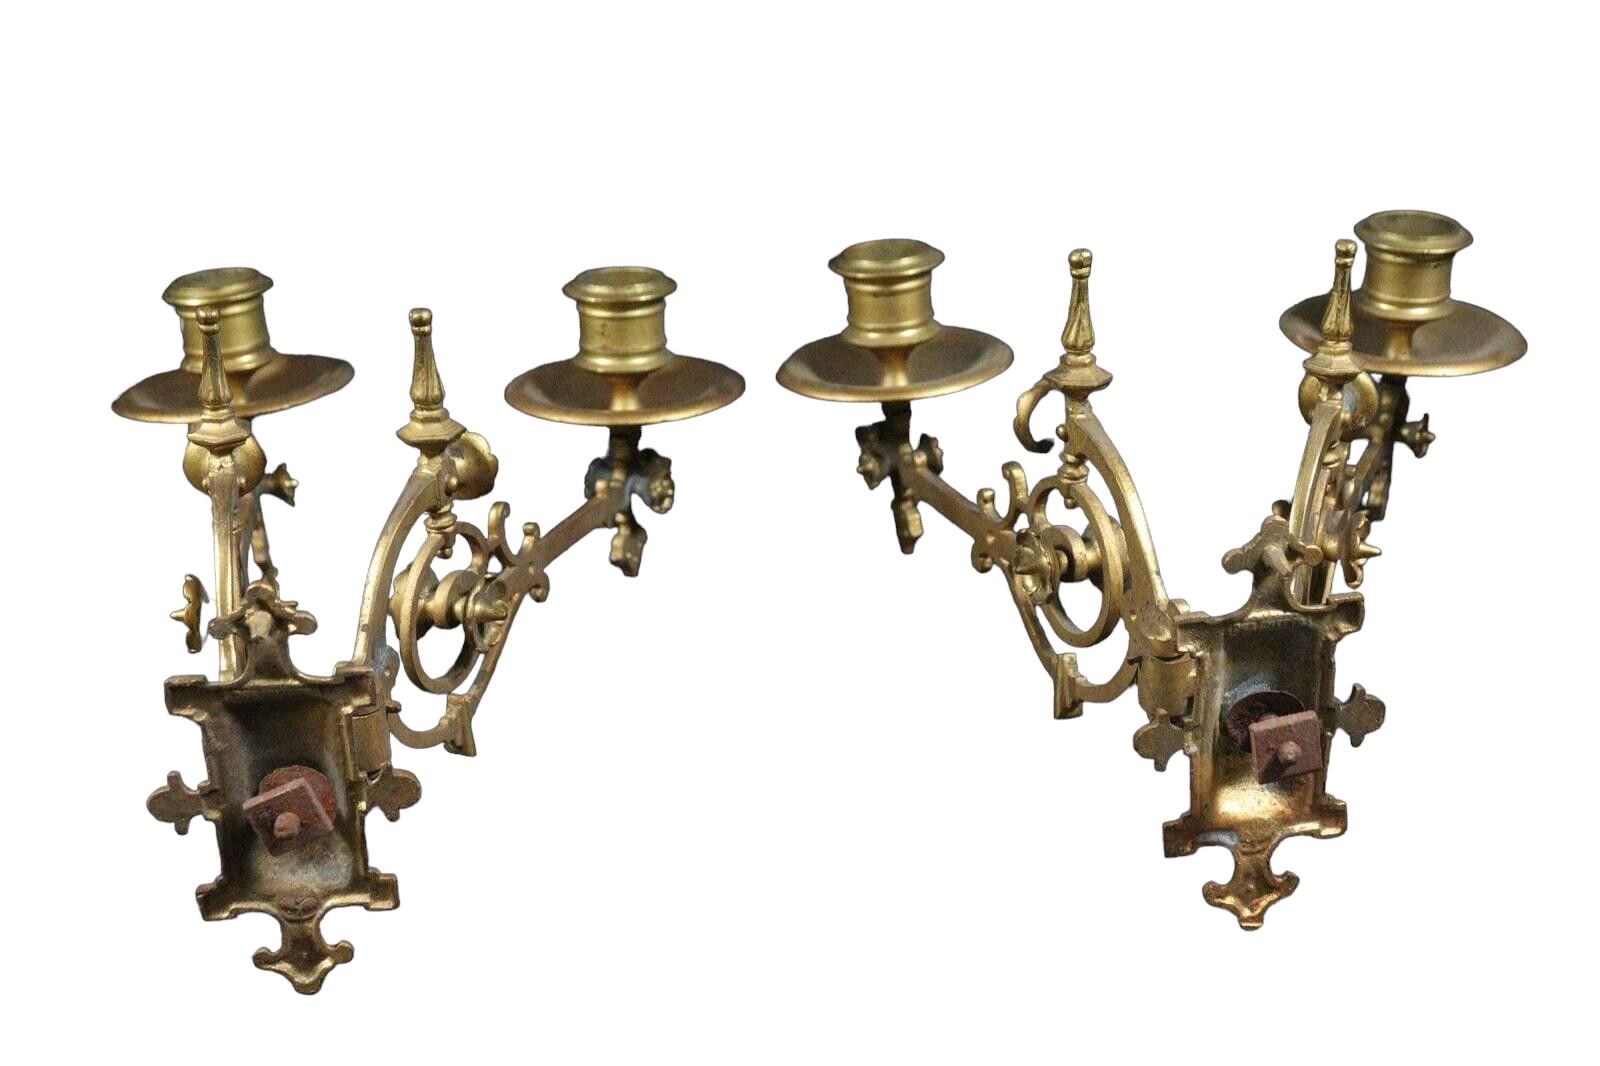 Two Original Bronze Art Nouveau Candle Sconce for a Piano or Wall Germany, 1890s For Sale 1